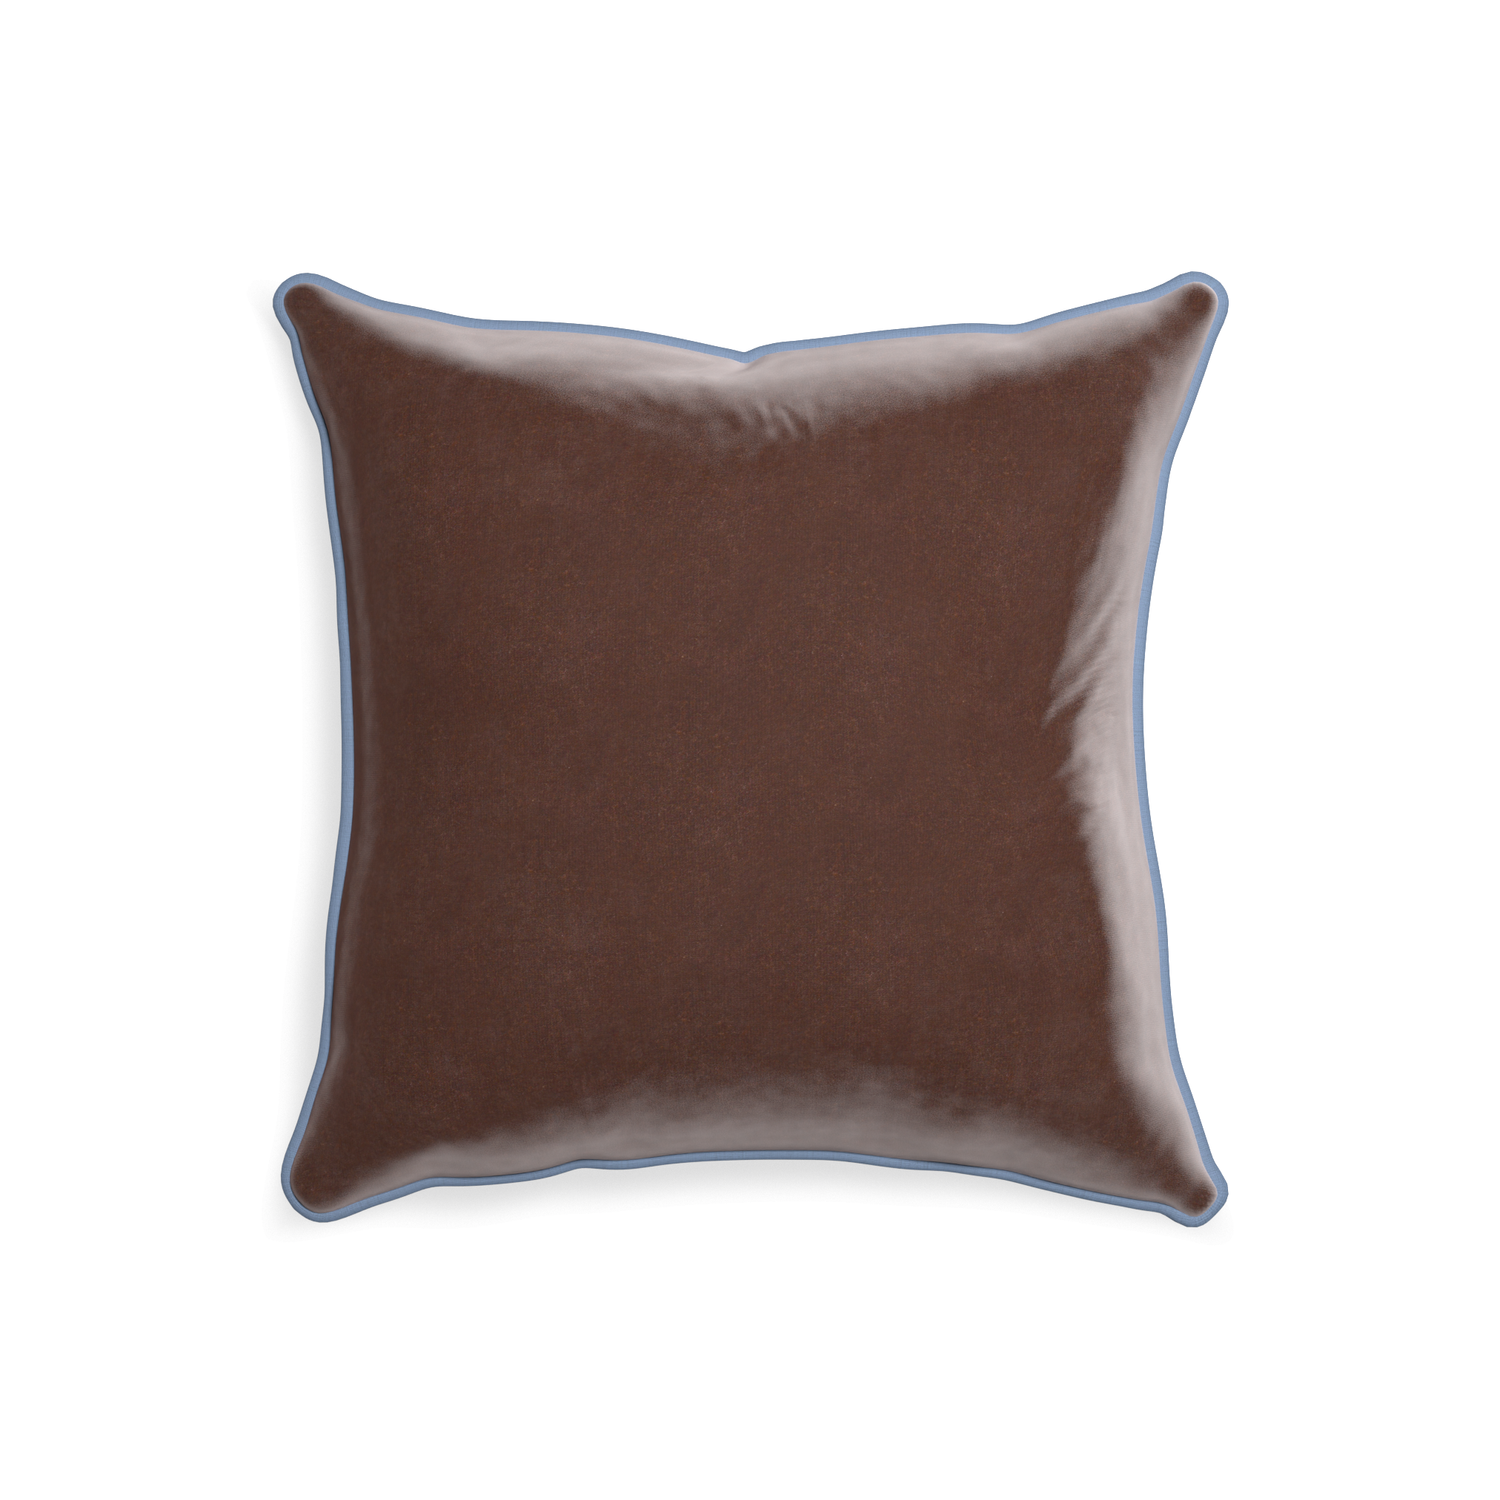 square brown velvet pillow with sky blue piping